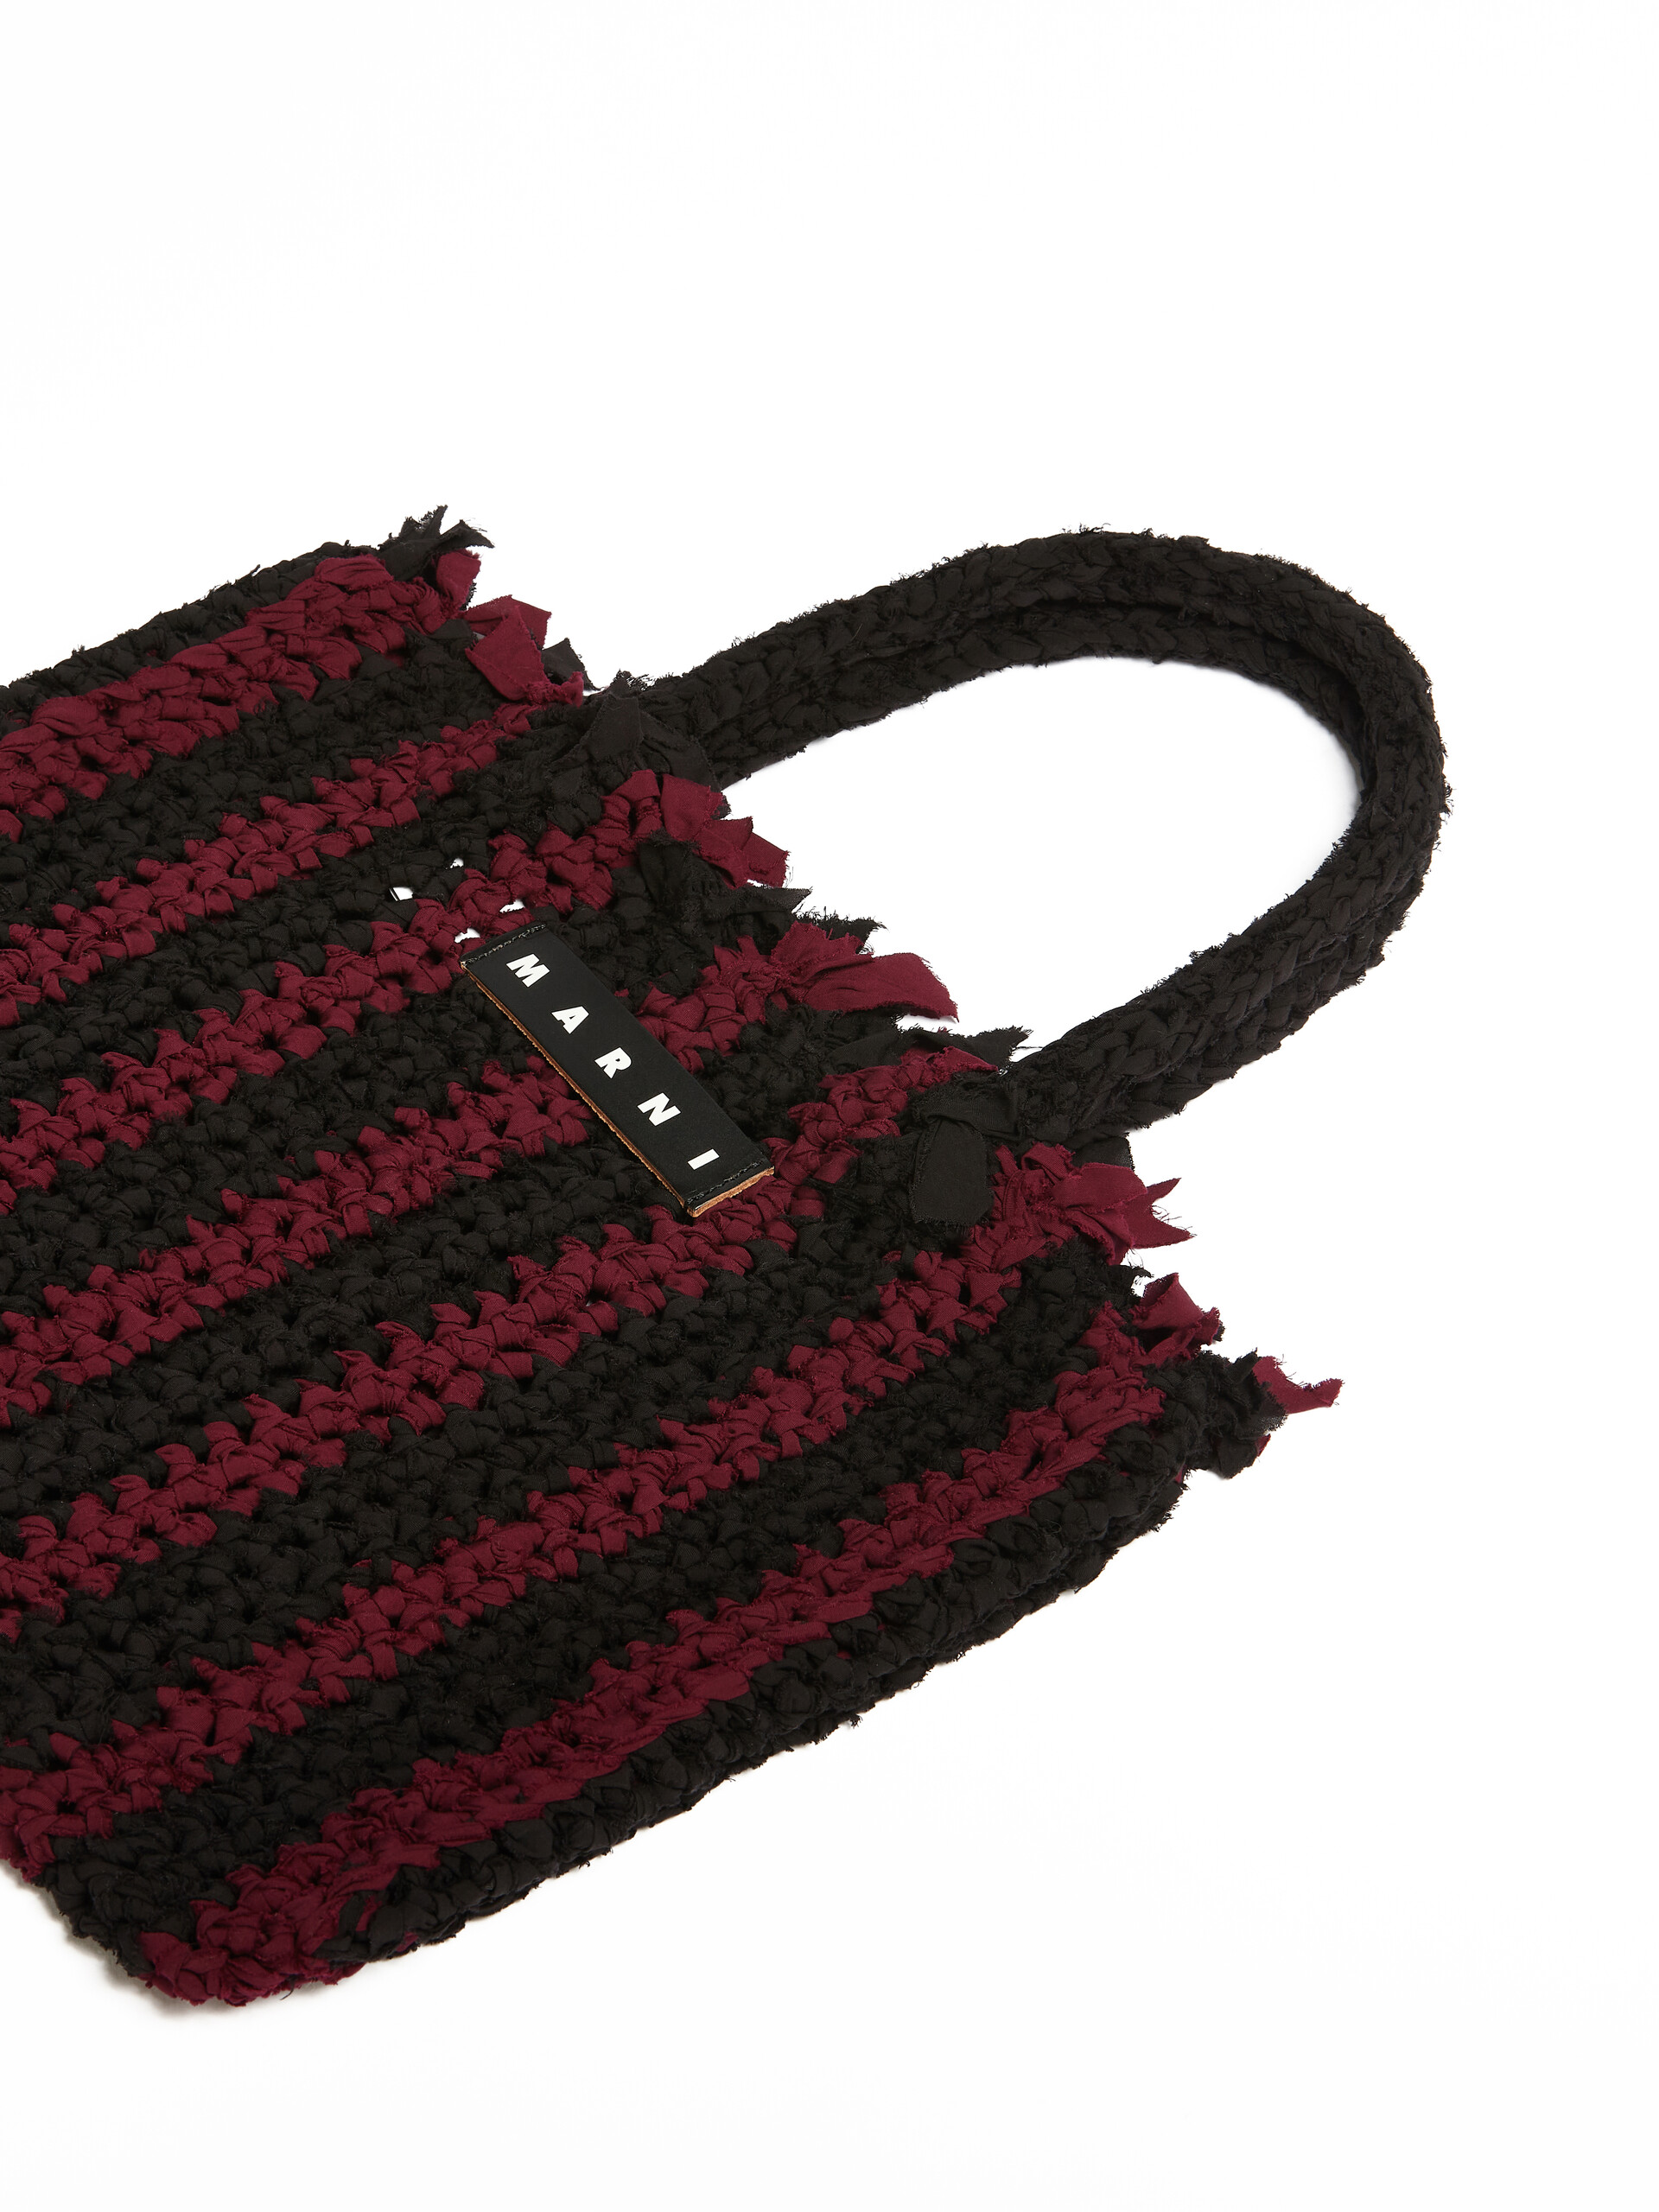 MARNI MARKET bag in black and burgundy cotton - Bags - Image 4